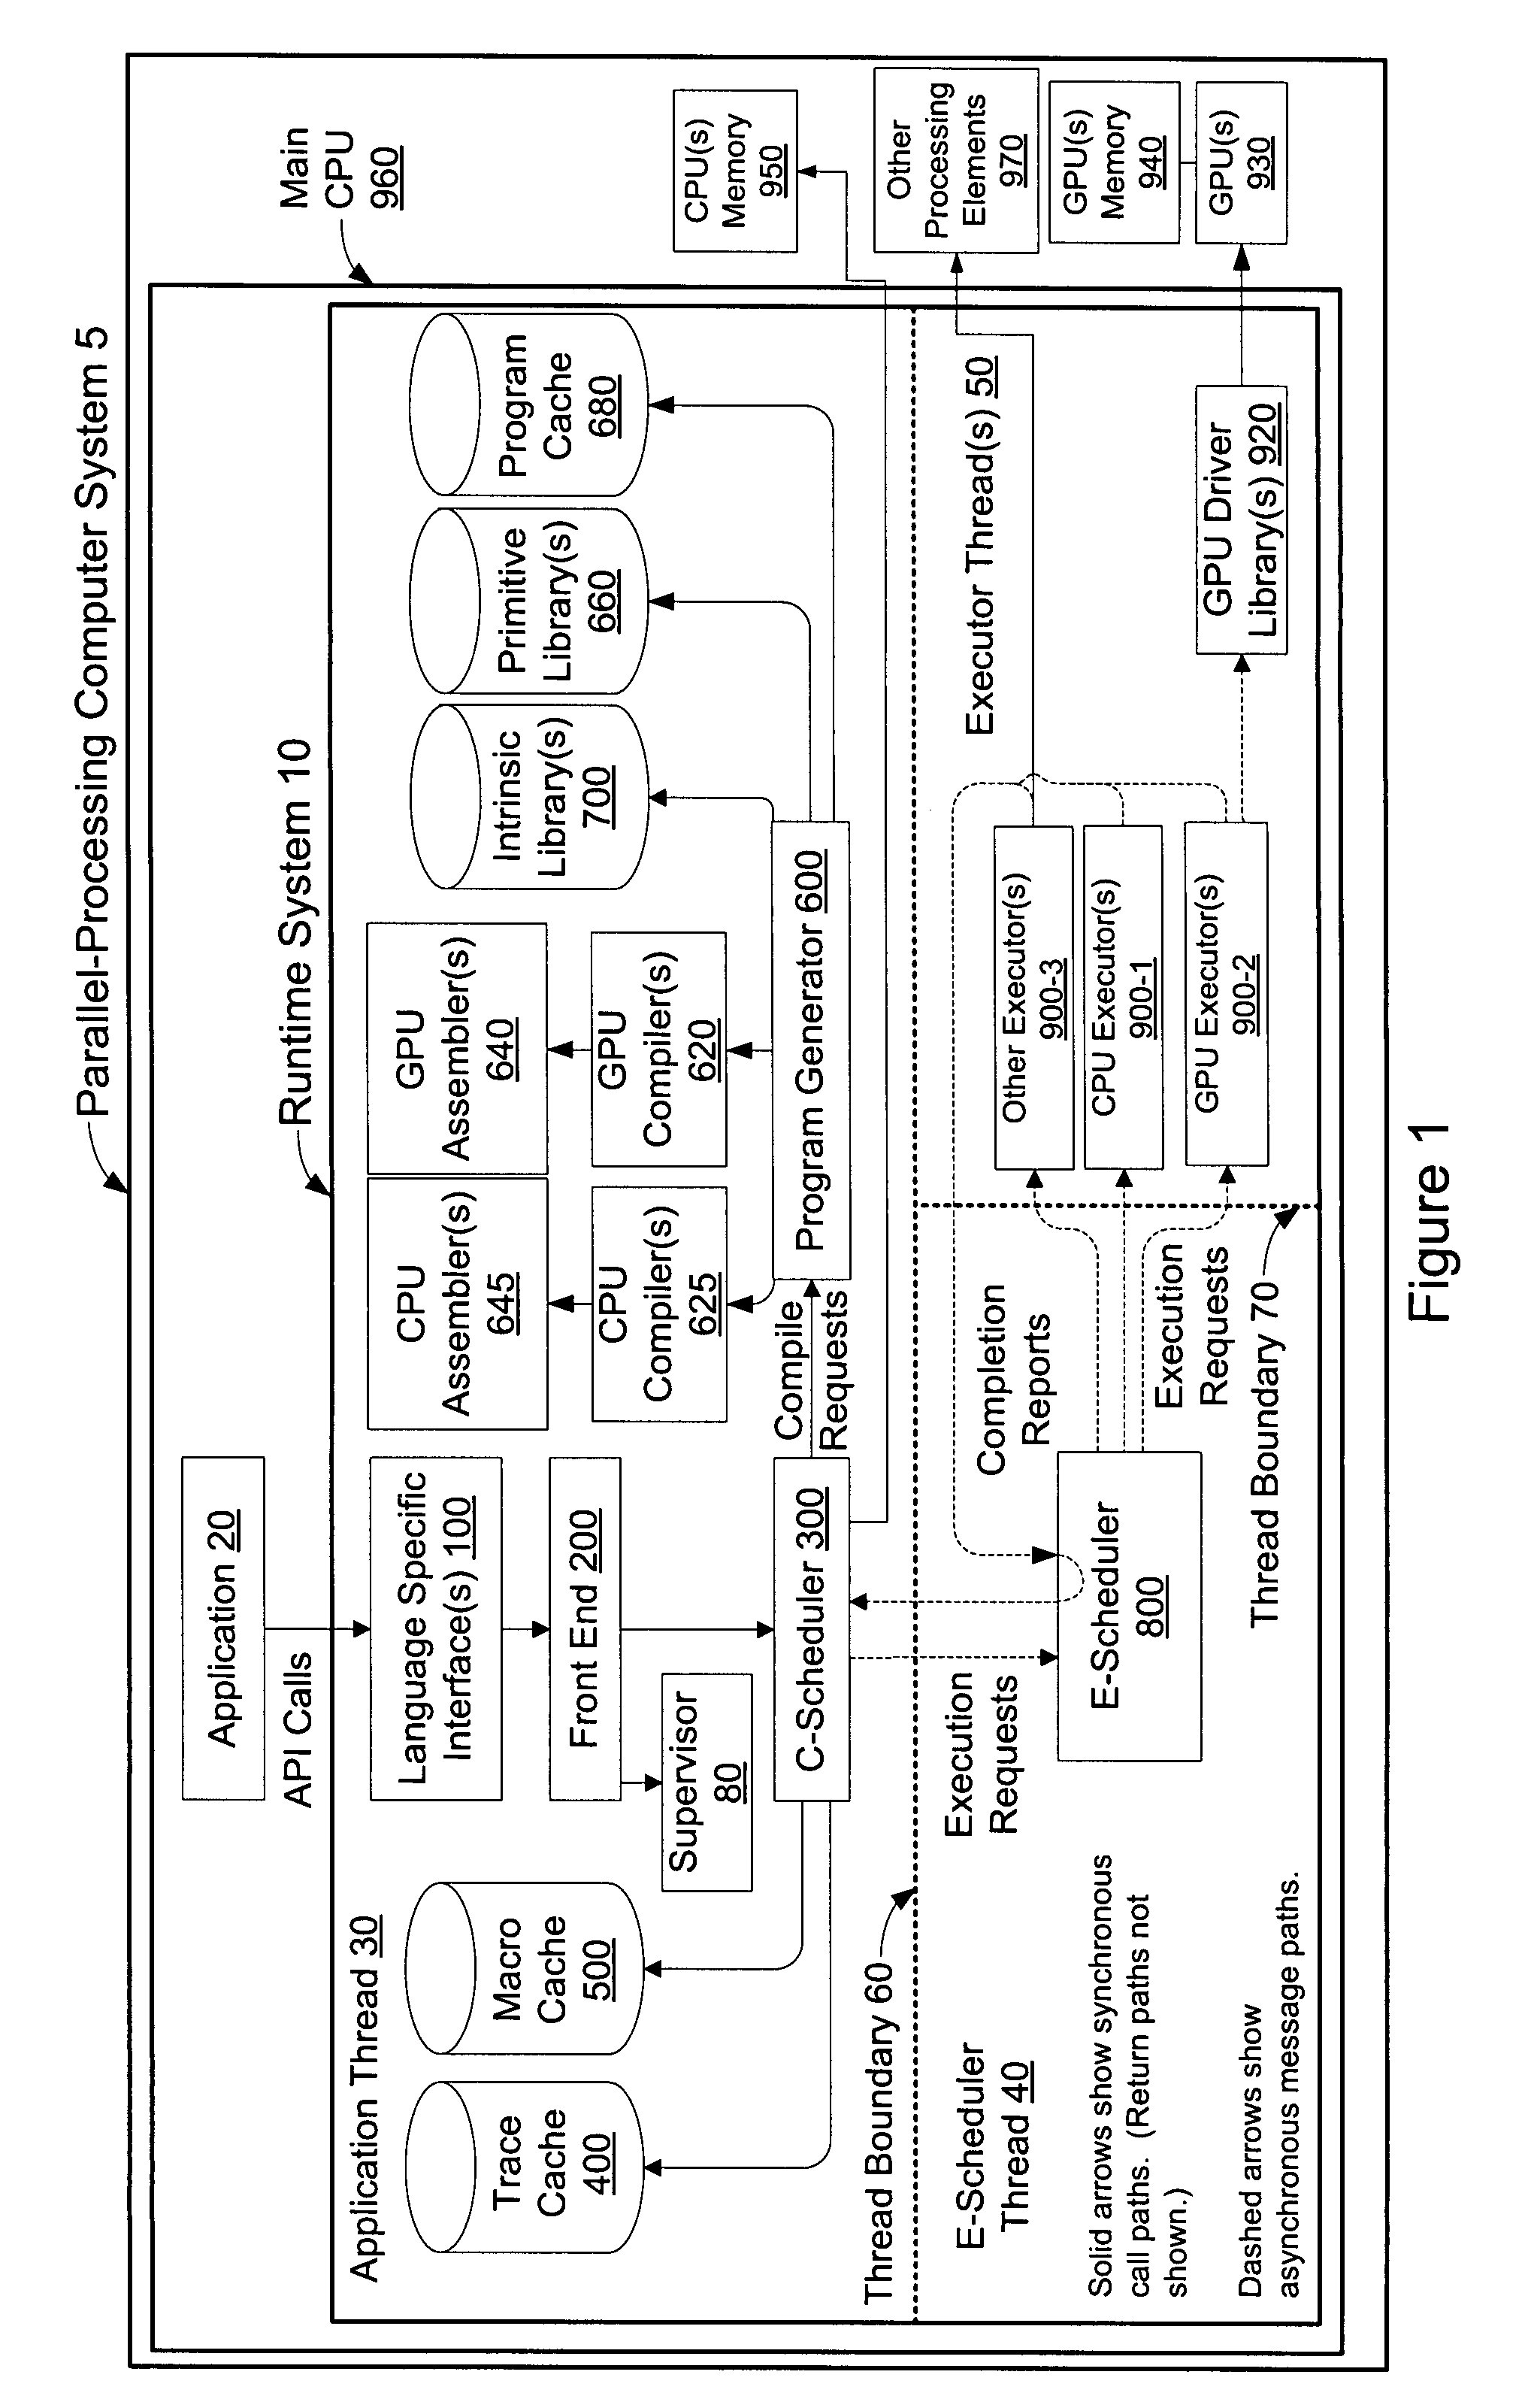 Systems and methods for dynamically choosing a processing element for a compute kernel